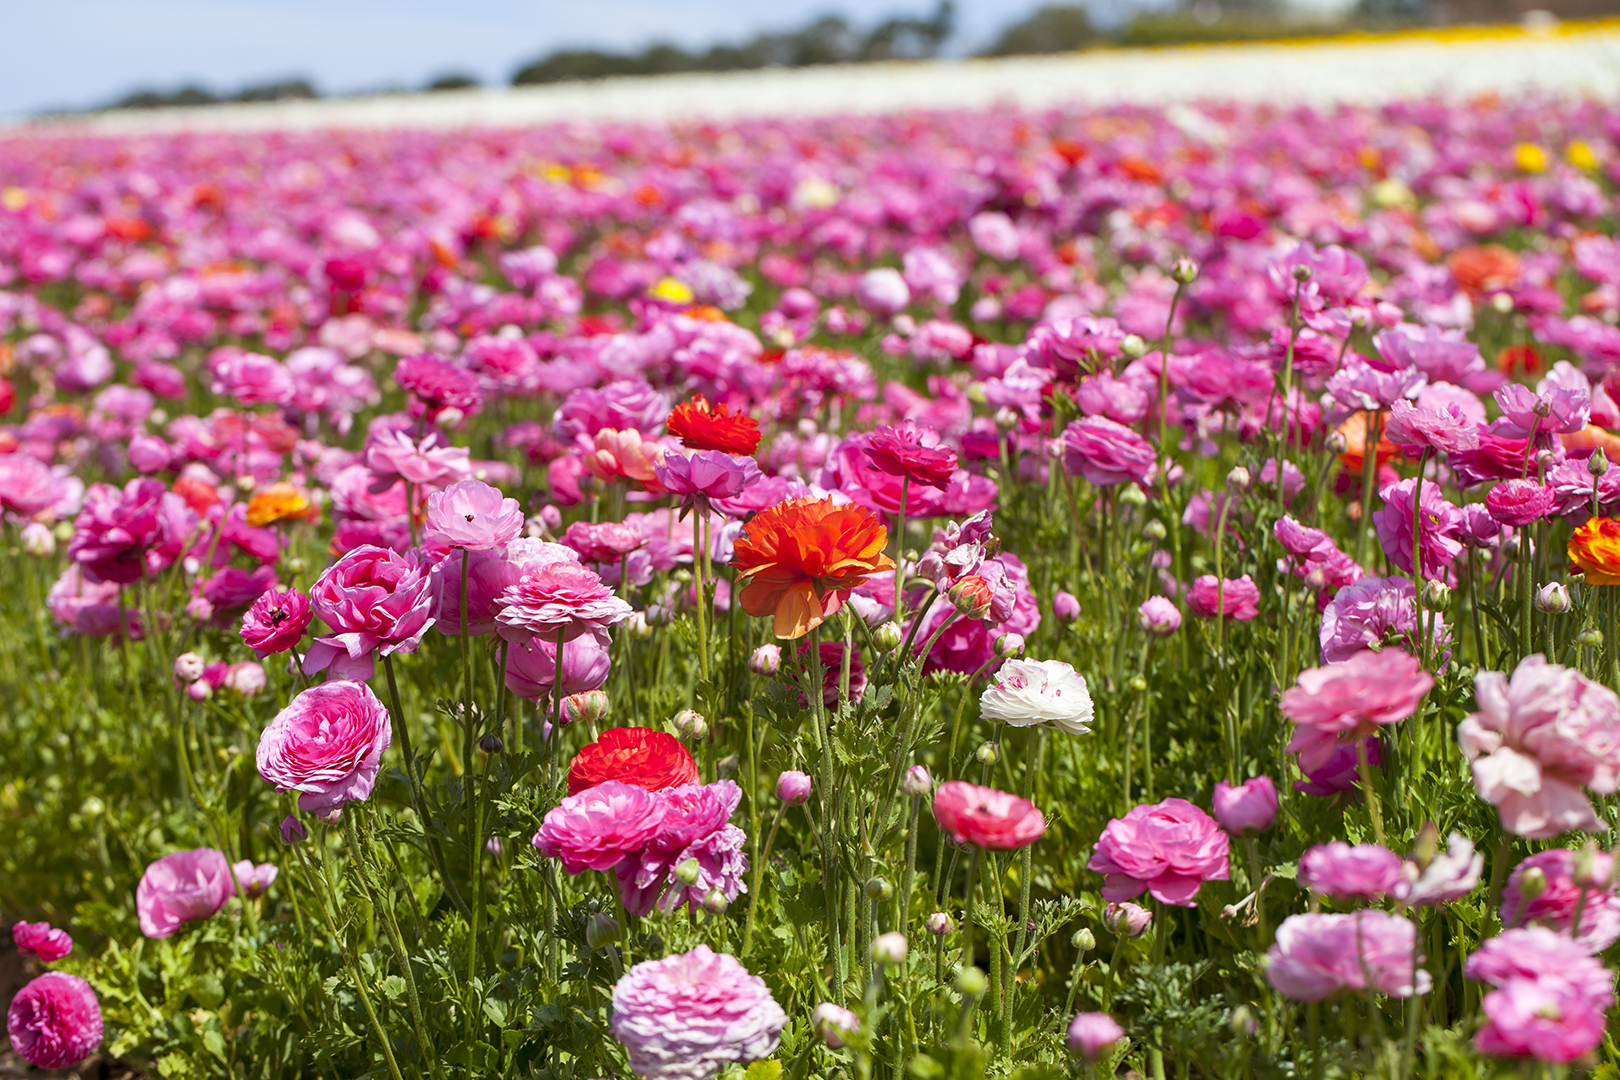 A field of pink at the Flower Fields of Carlsbad.